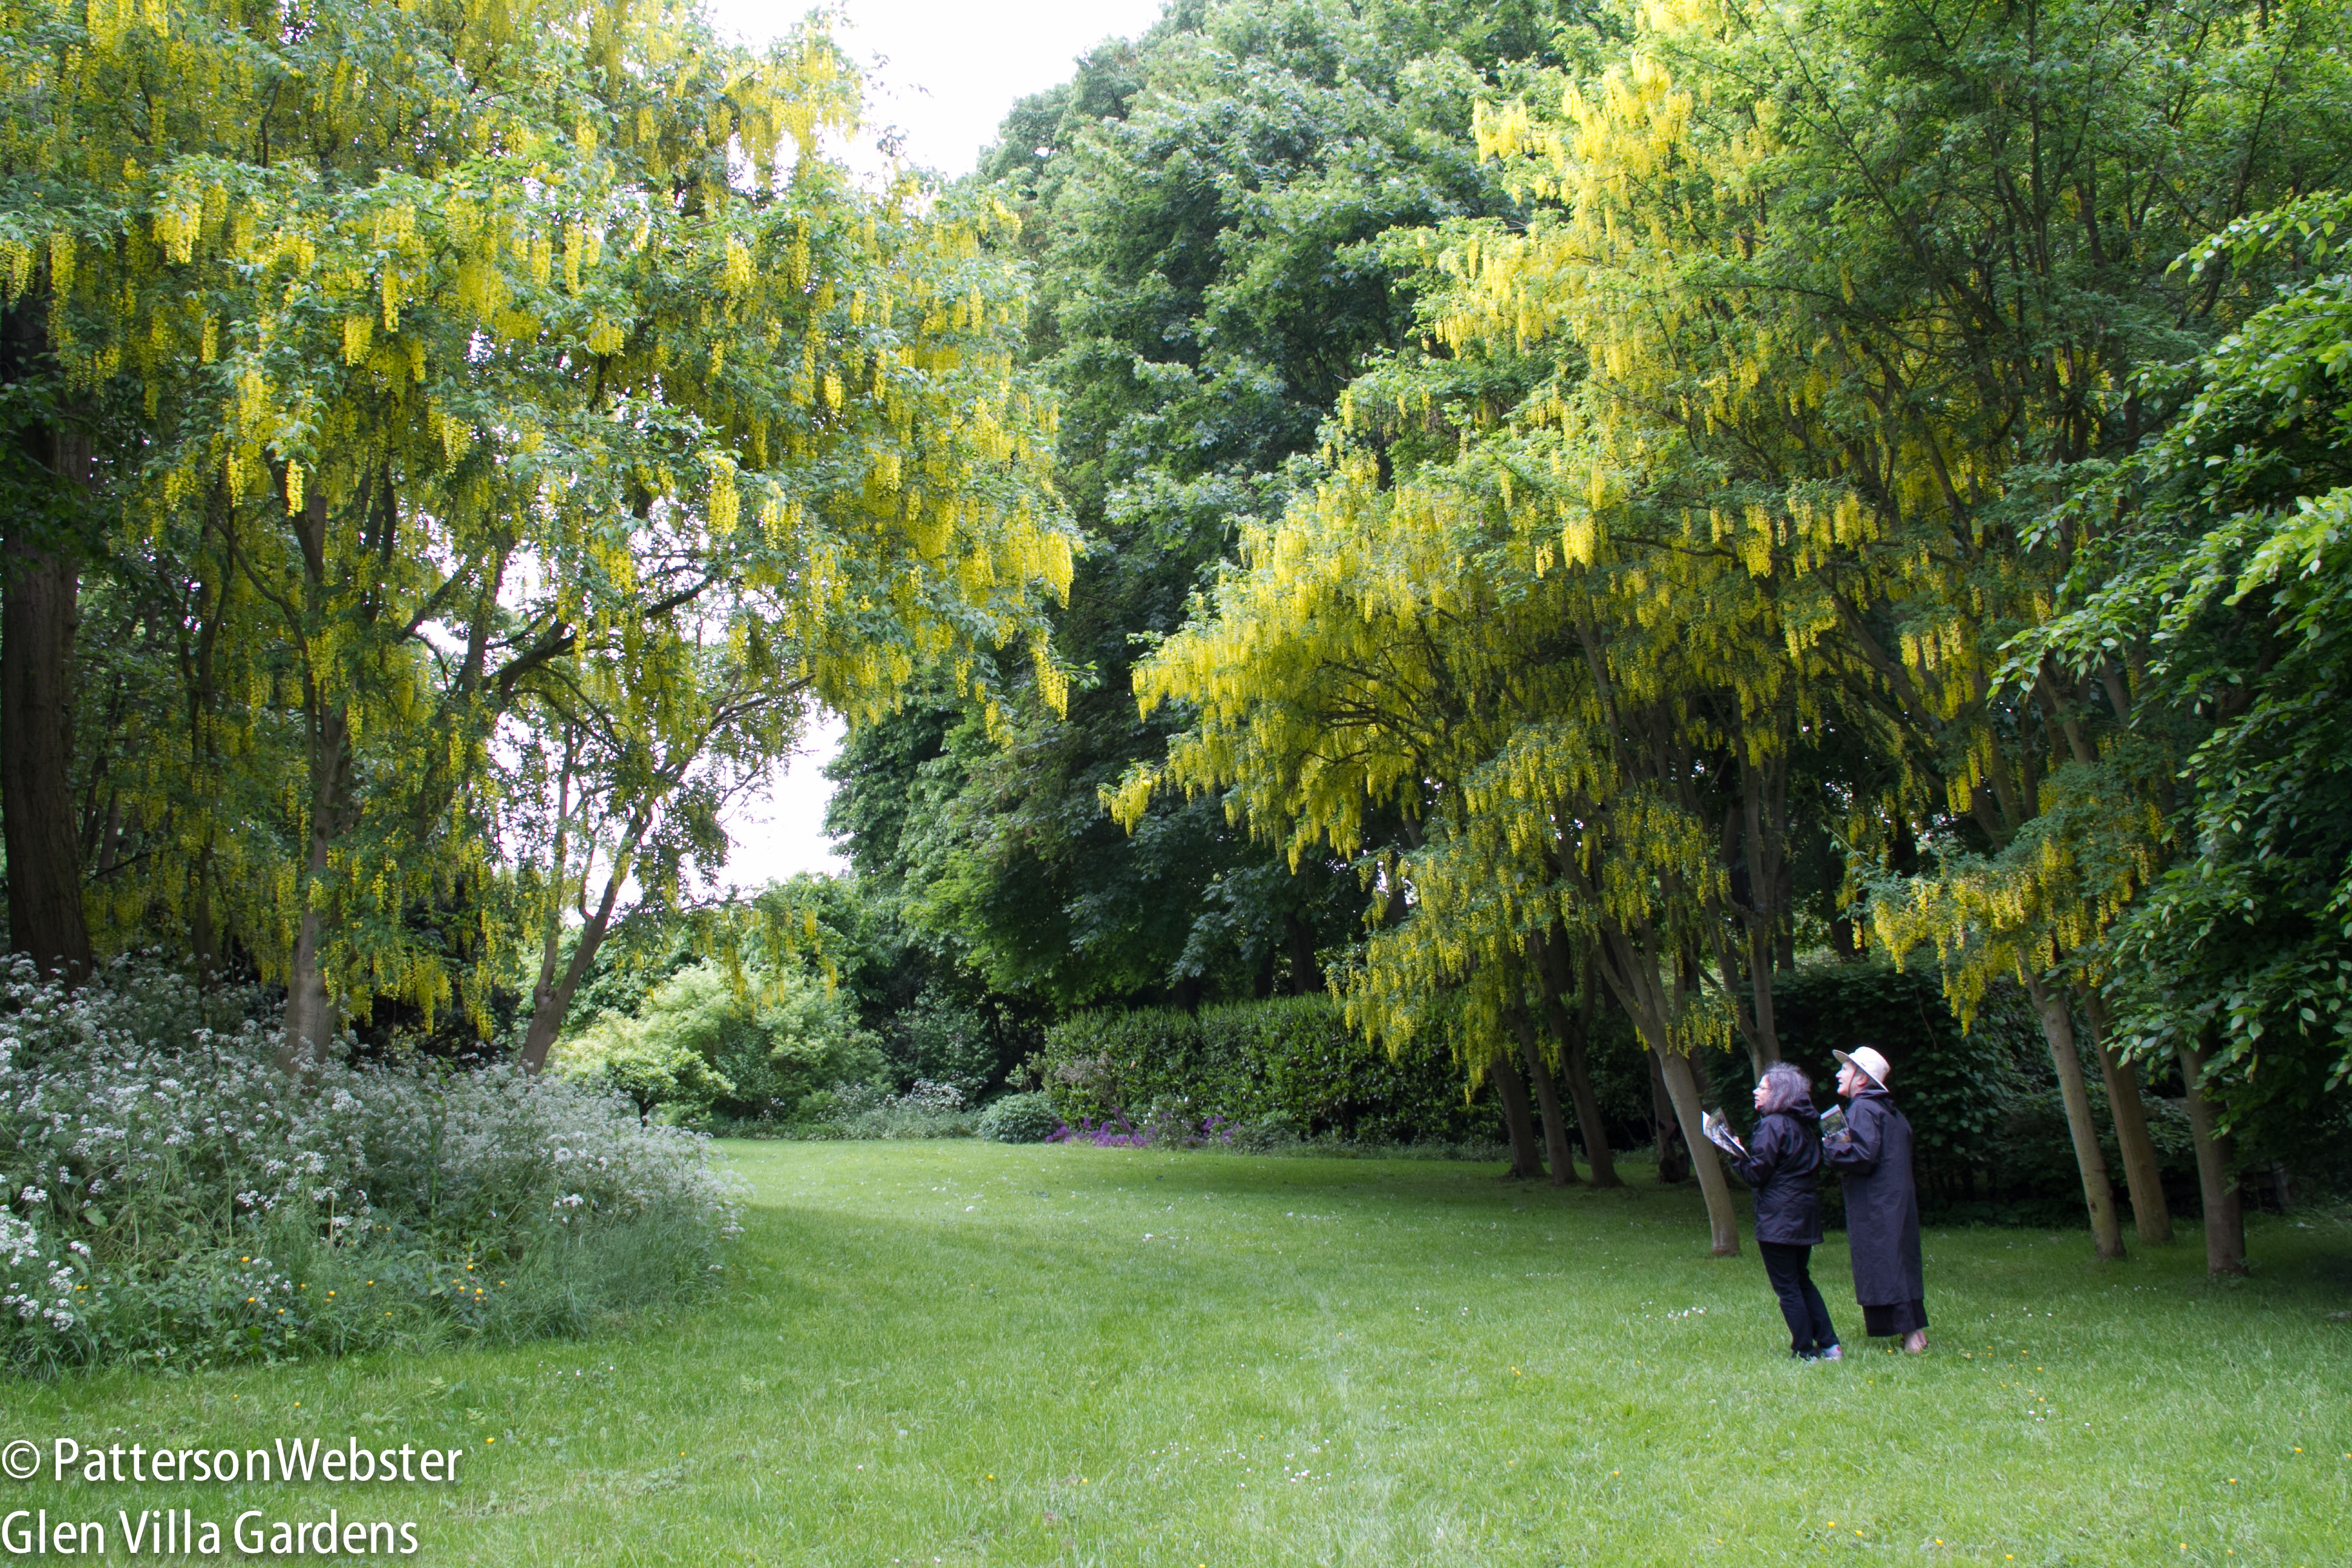 Laburnum trees dwarf the real actors, busy taking photos of the trees.